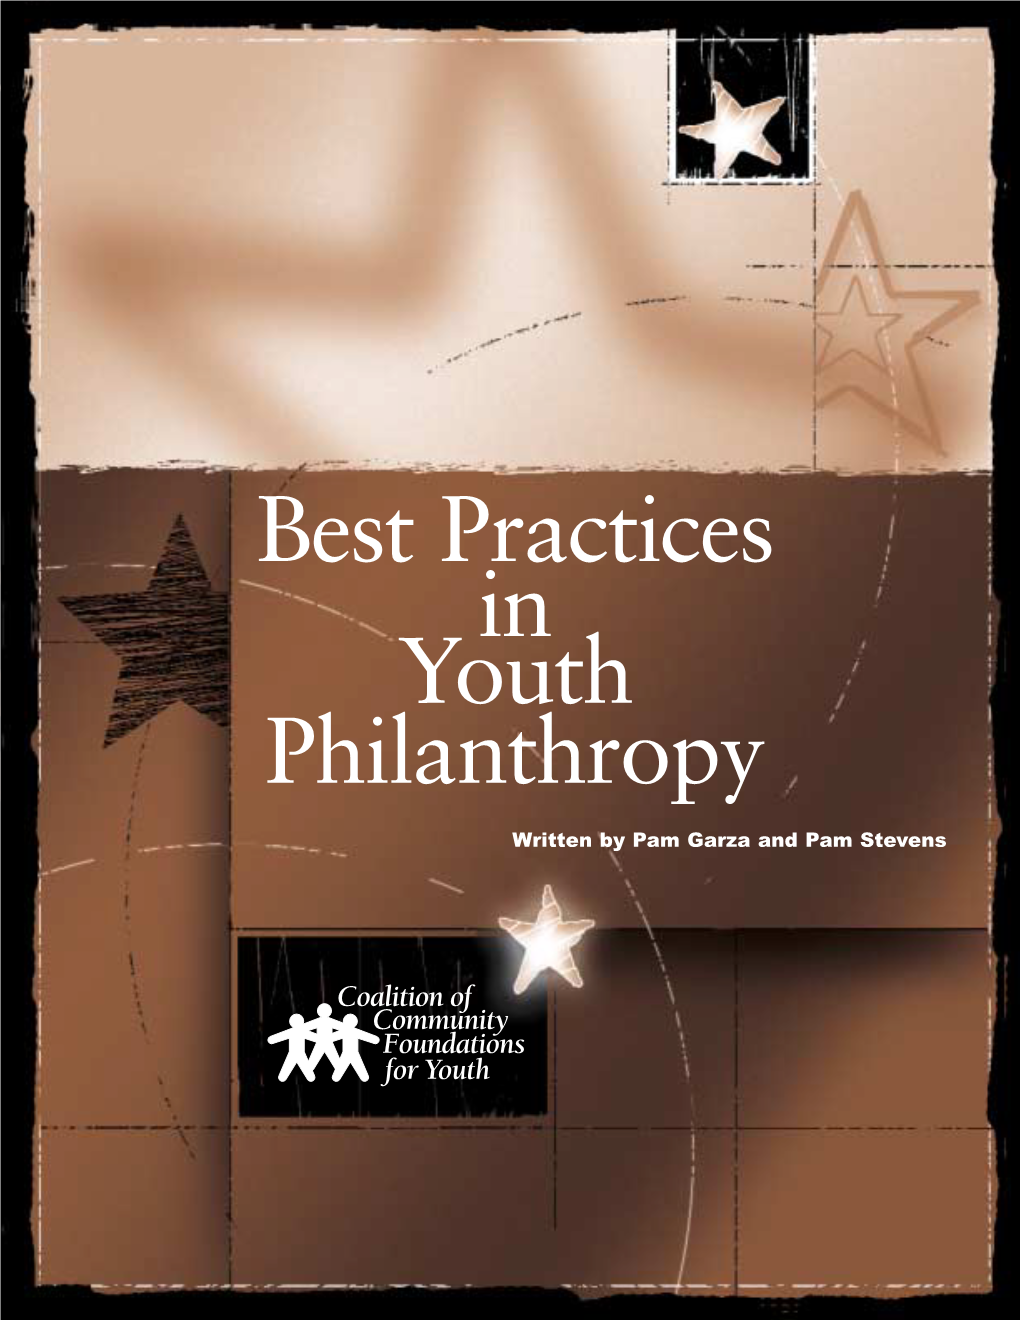 Best Practices in Youth Philanthropy